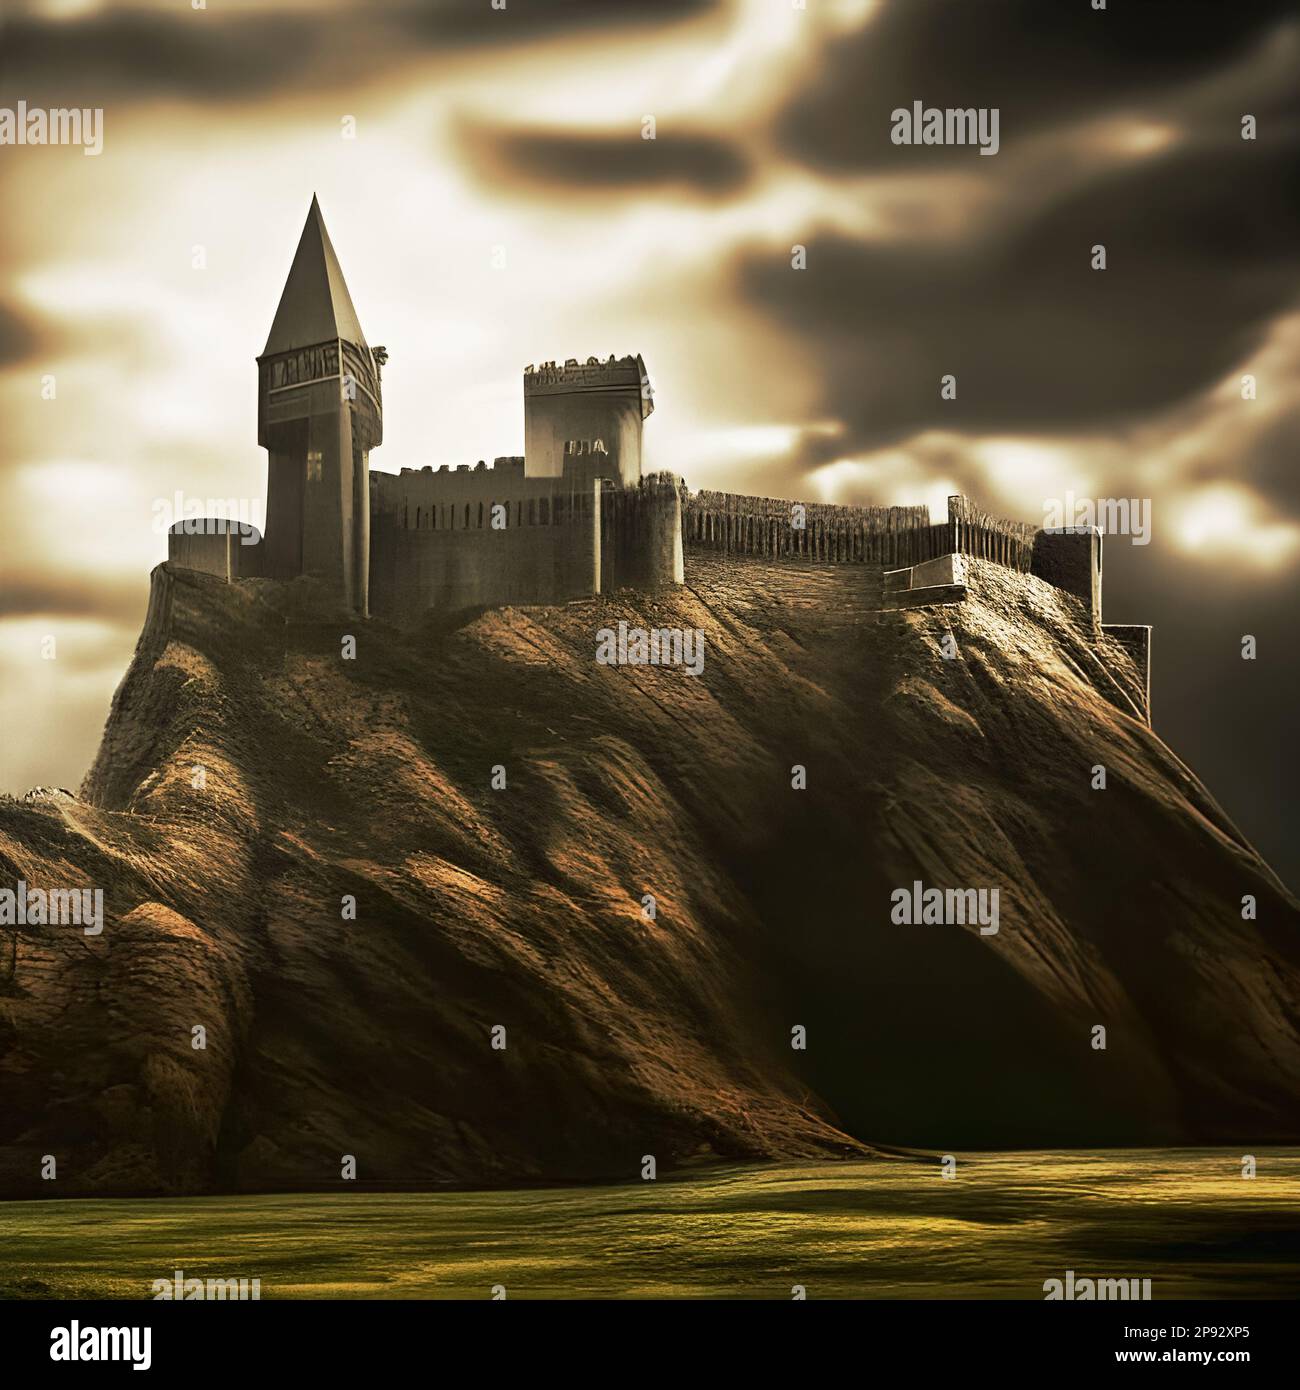 Middle-ages castle fornification on a mountain. Edited AI generated image Stock Photo